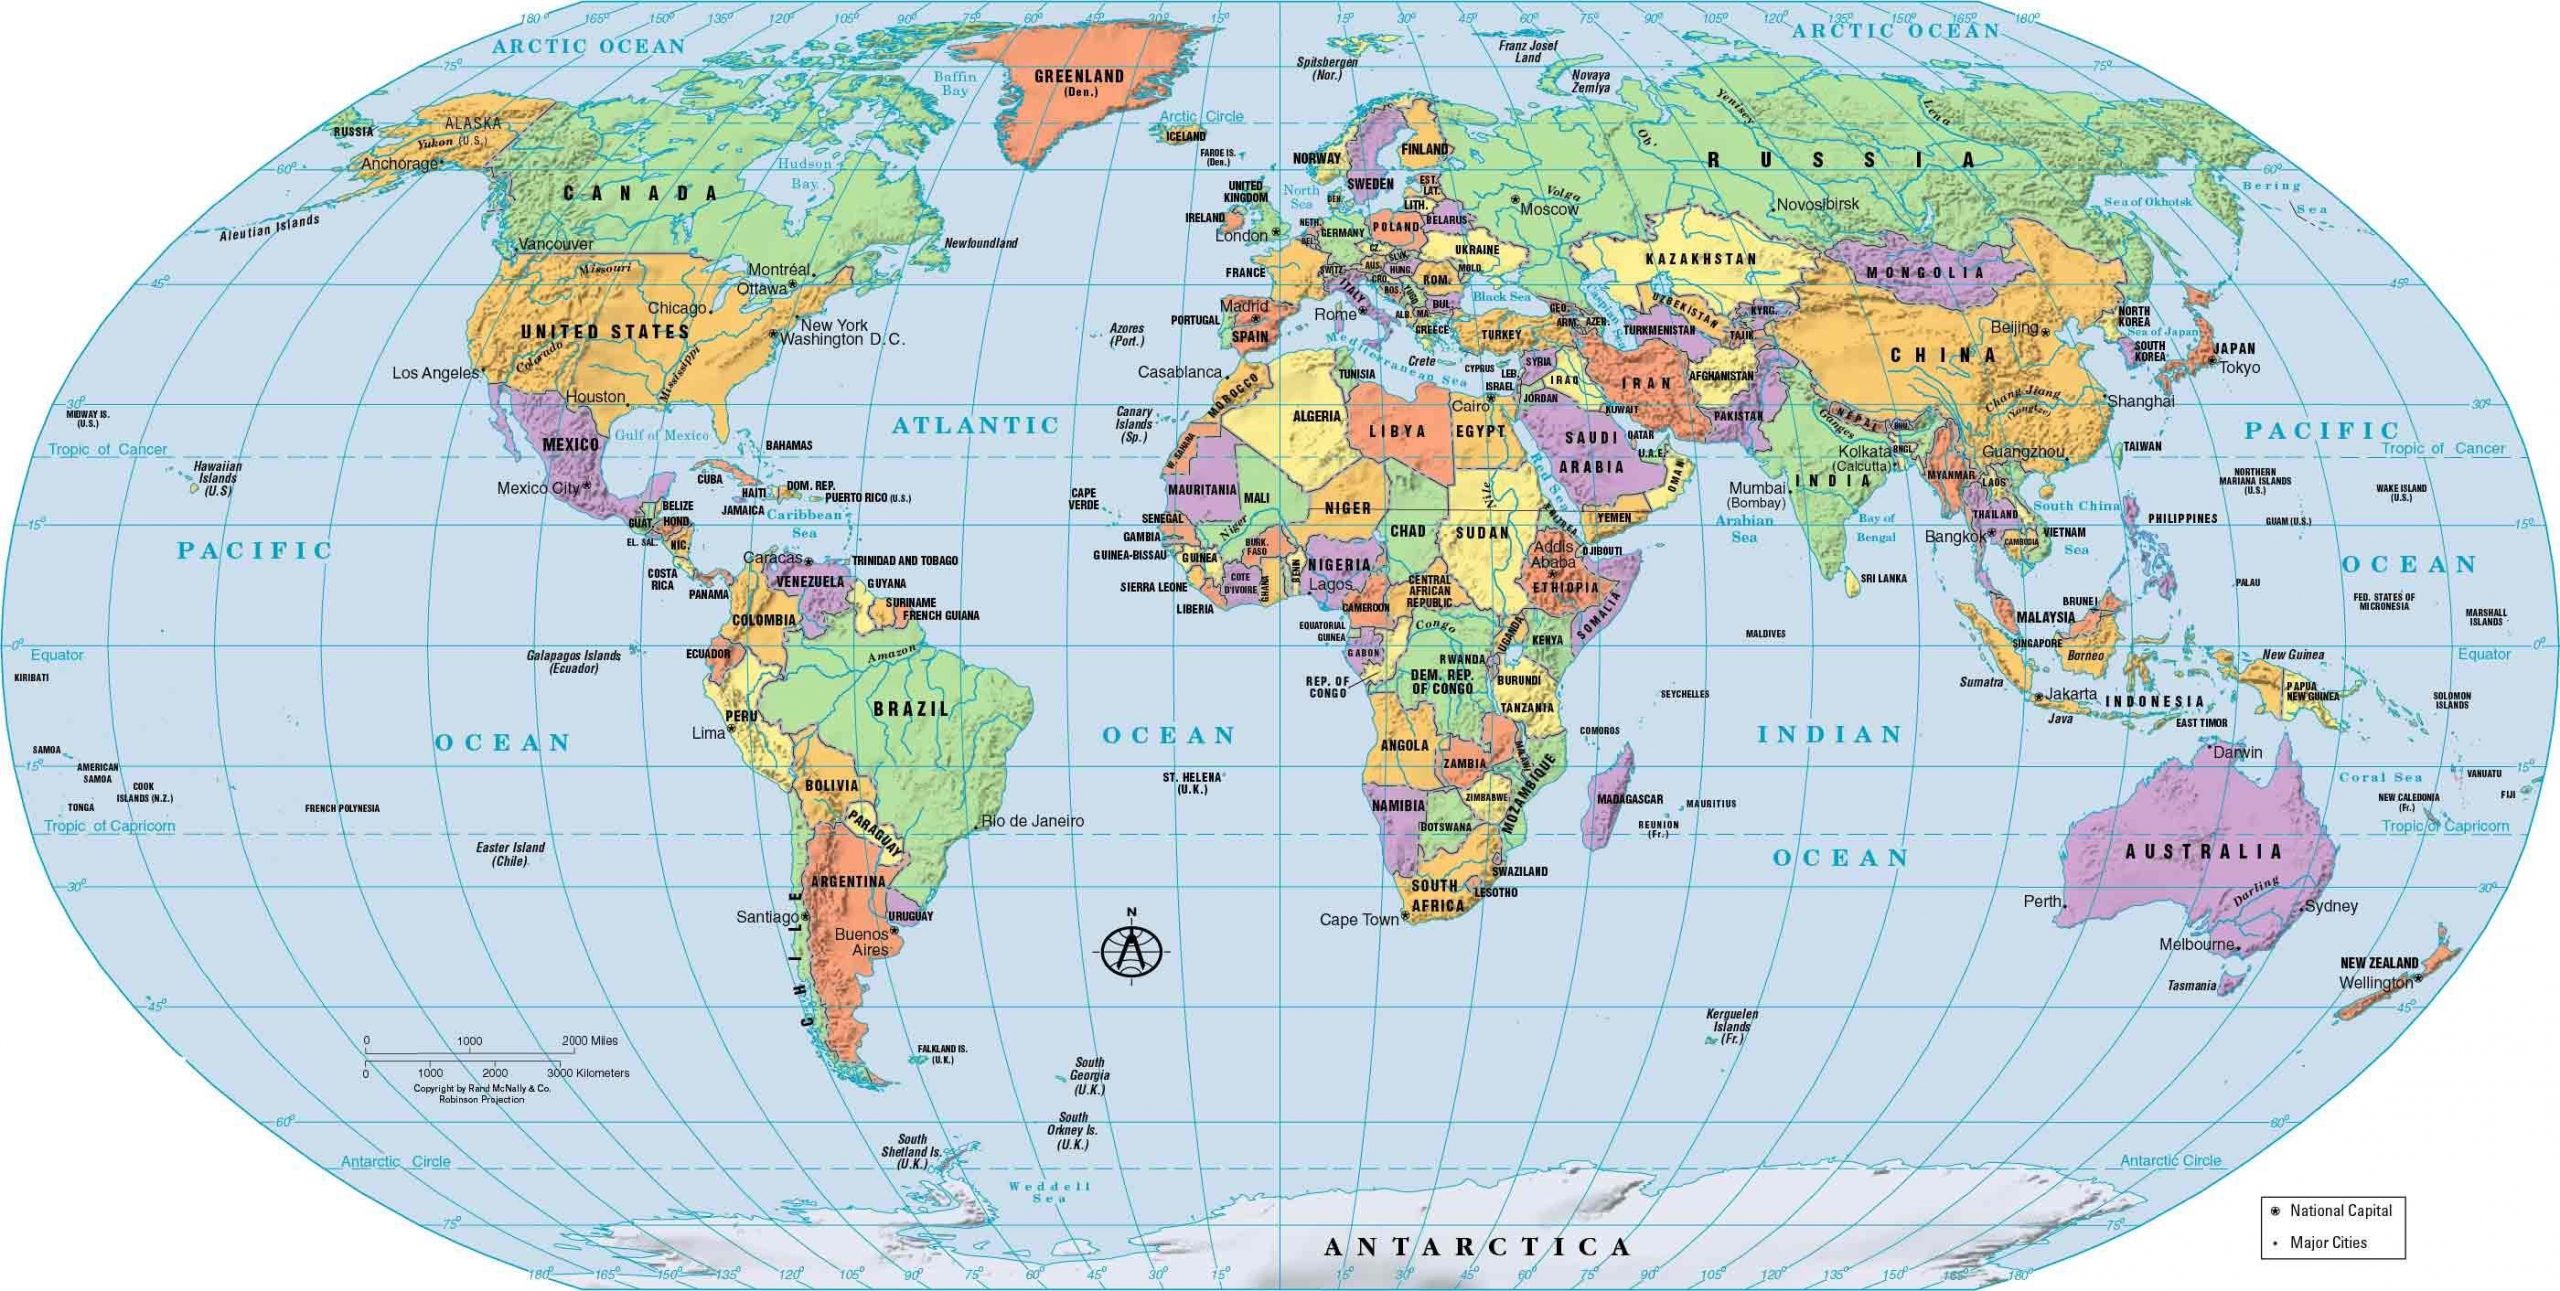 World Maps Download - World Maps - Map Pictures